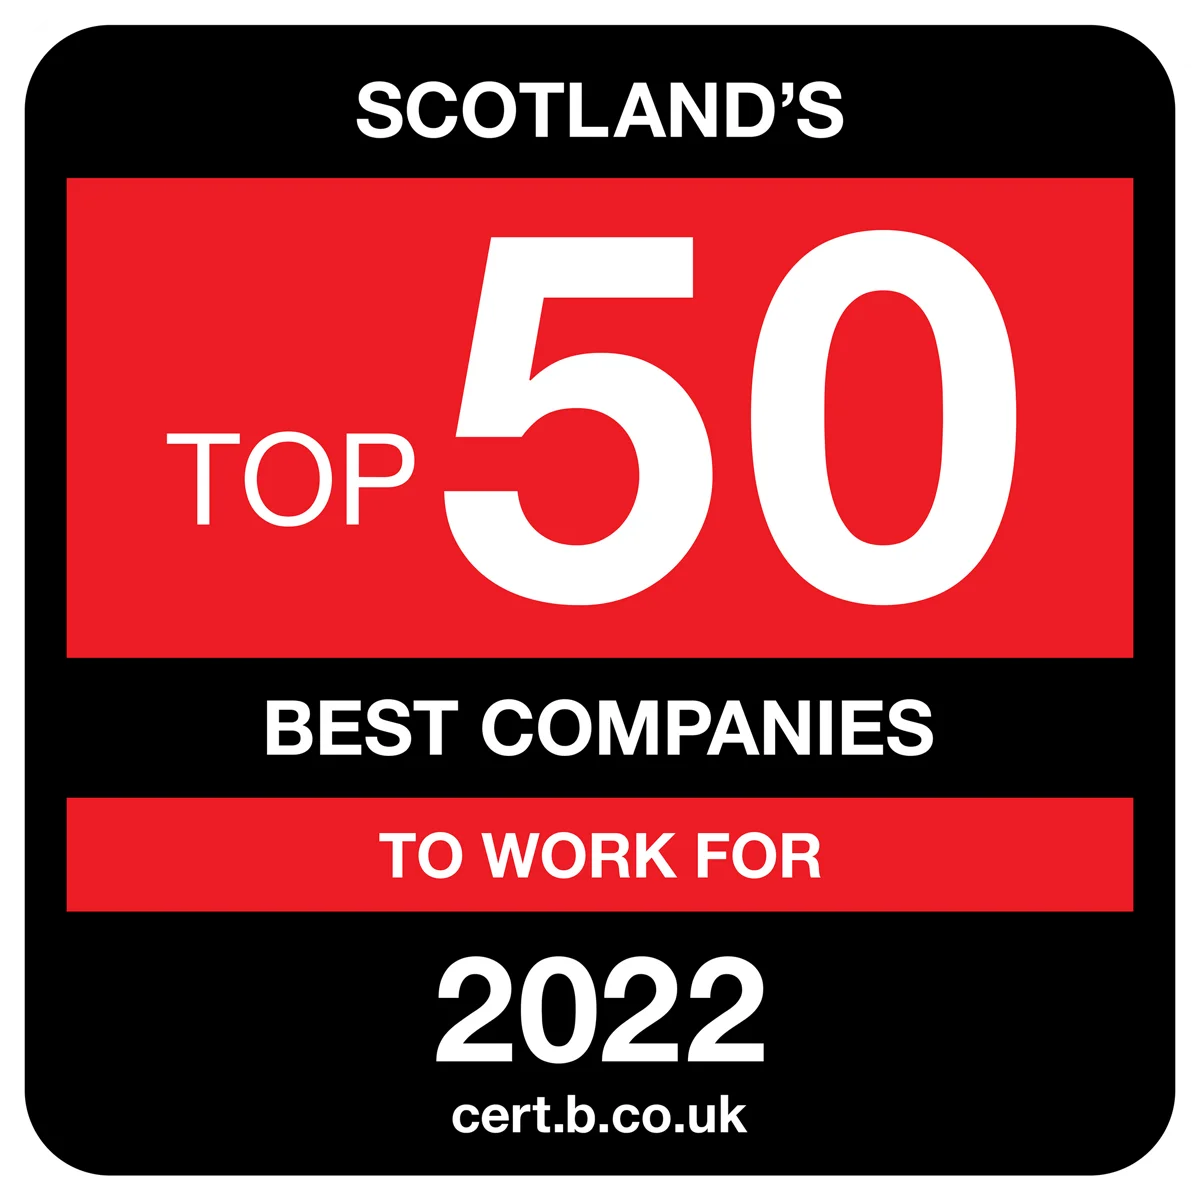 A sign that says top 50 best companies to work for 2022 in Scotland